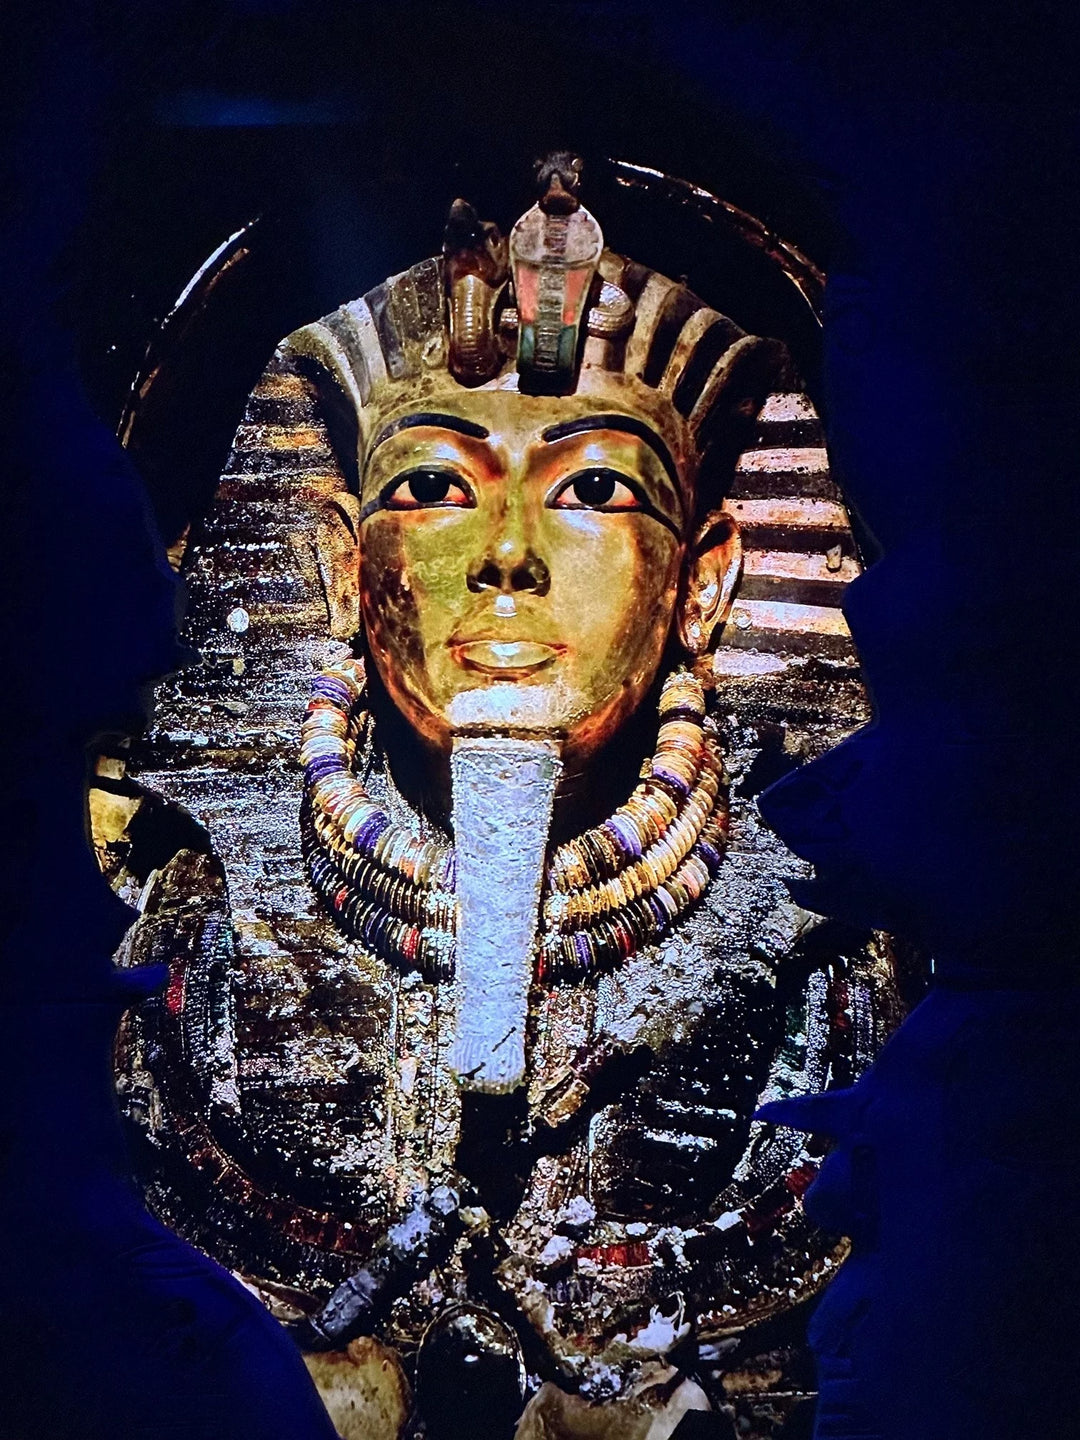 Beyond King Tut – The Immersive Experience